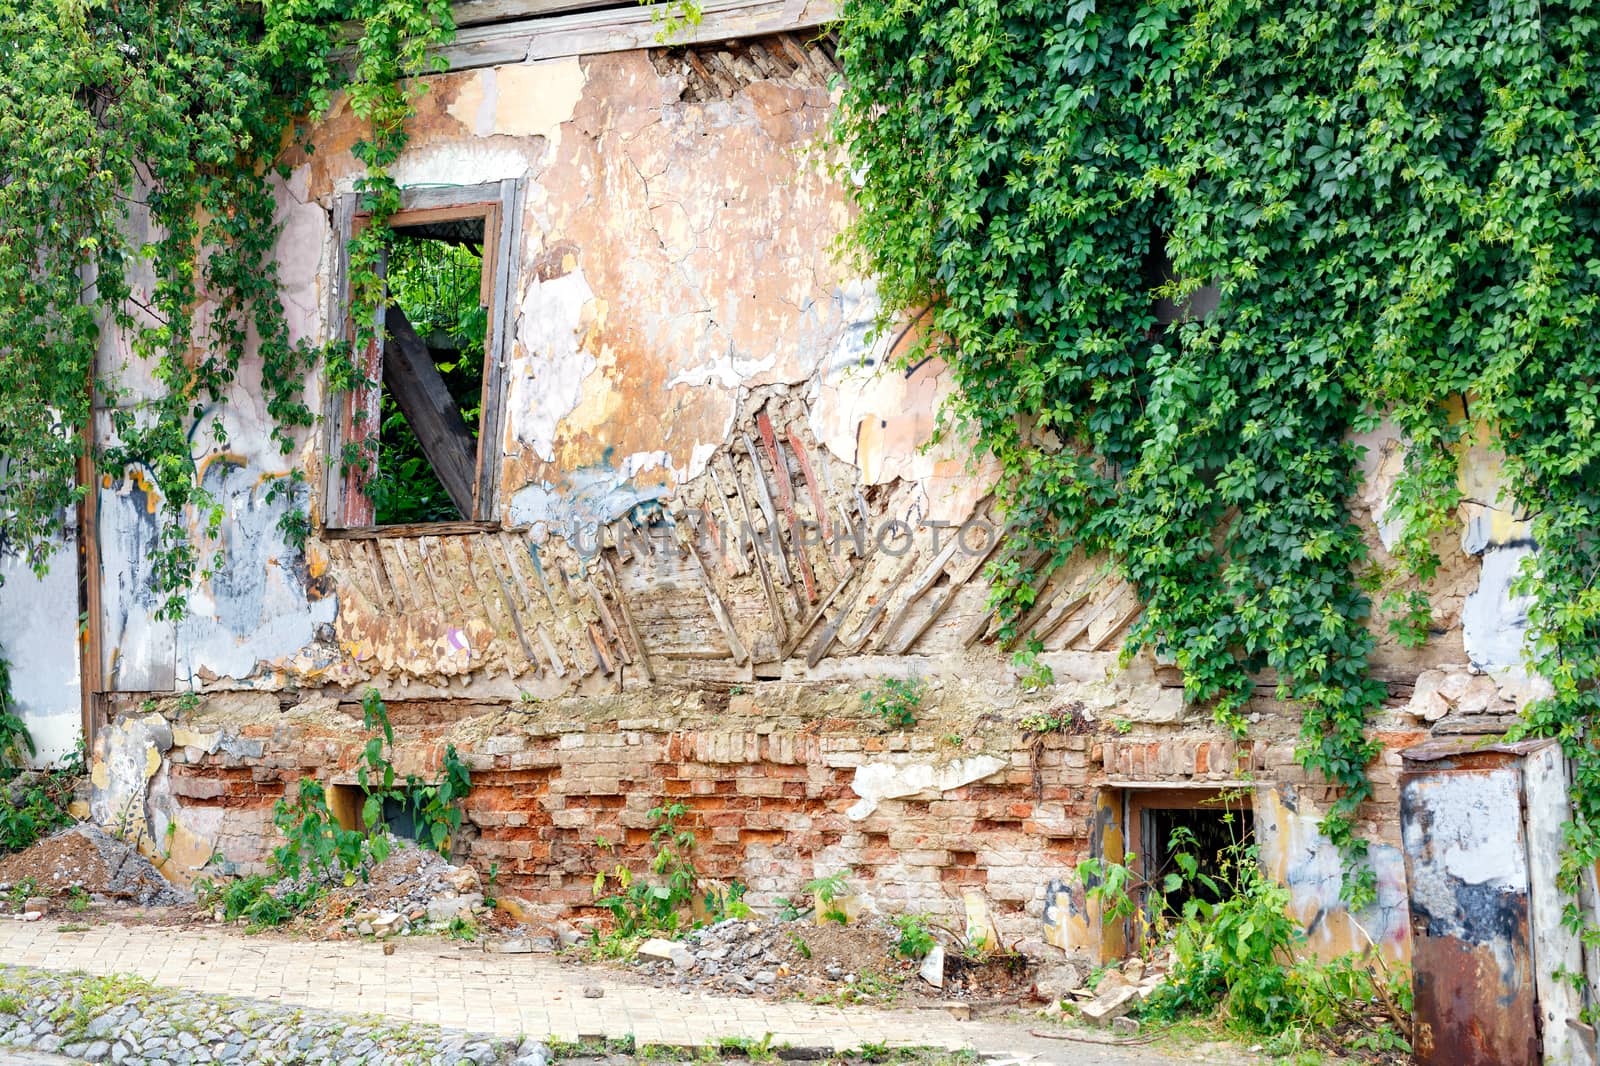 The rickety wall of the dilapidated old house was overgrown with wild grapes. by Sergii